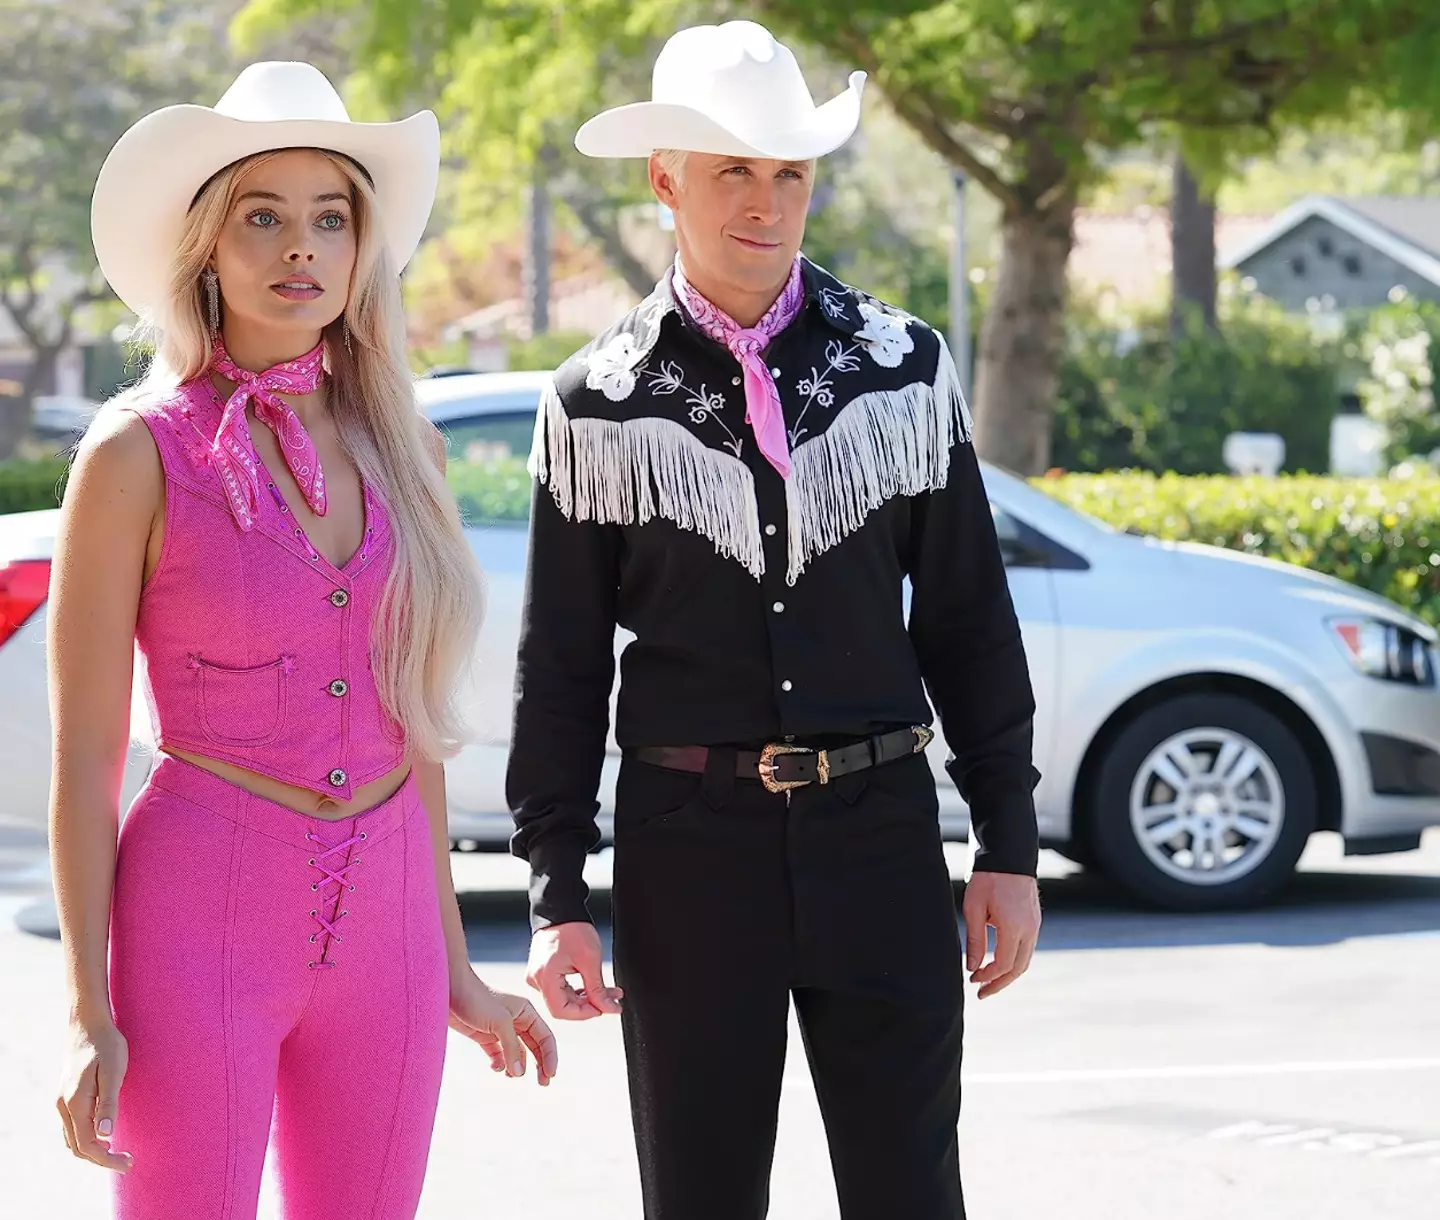 Barbie's cowboy outfit definitely isn't your average real-world style.